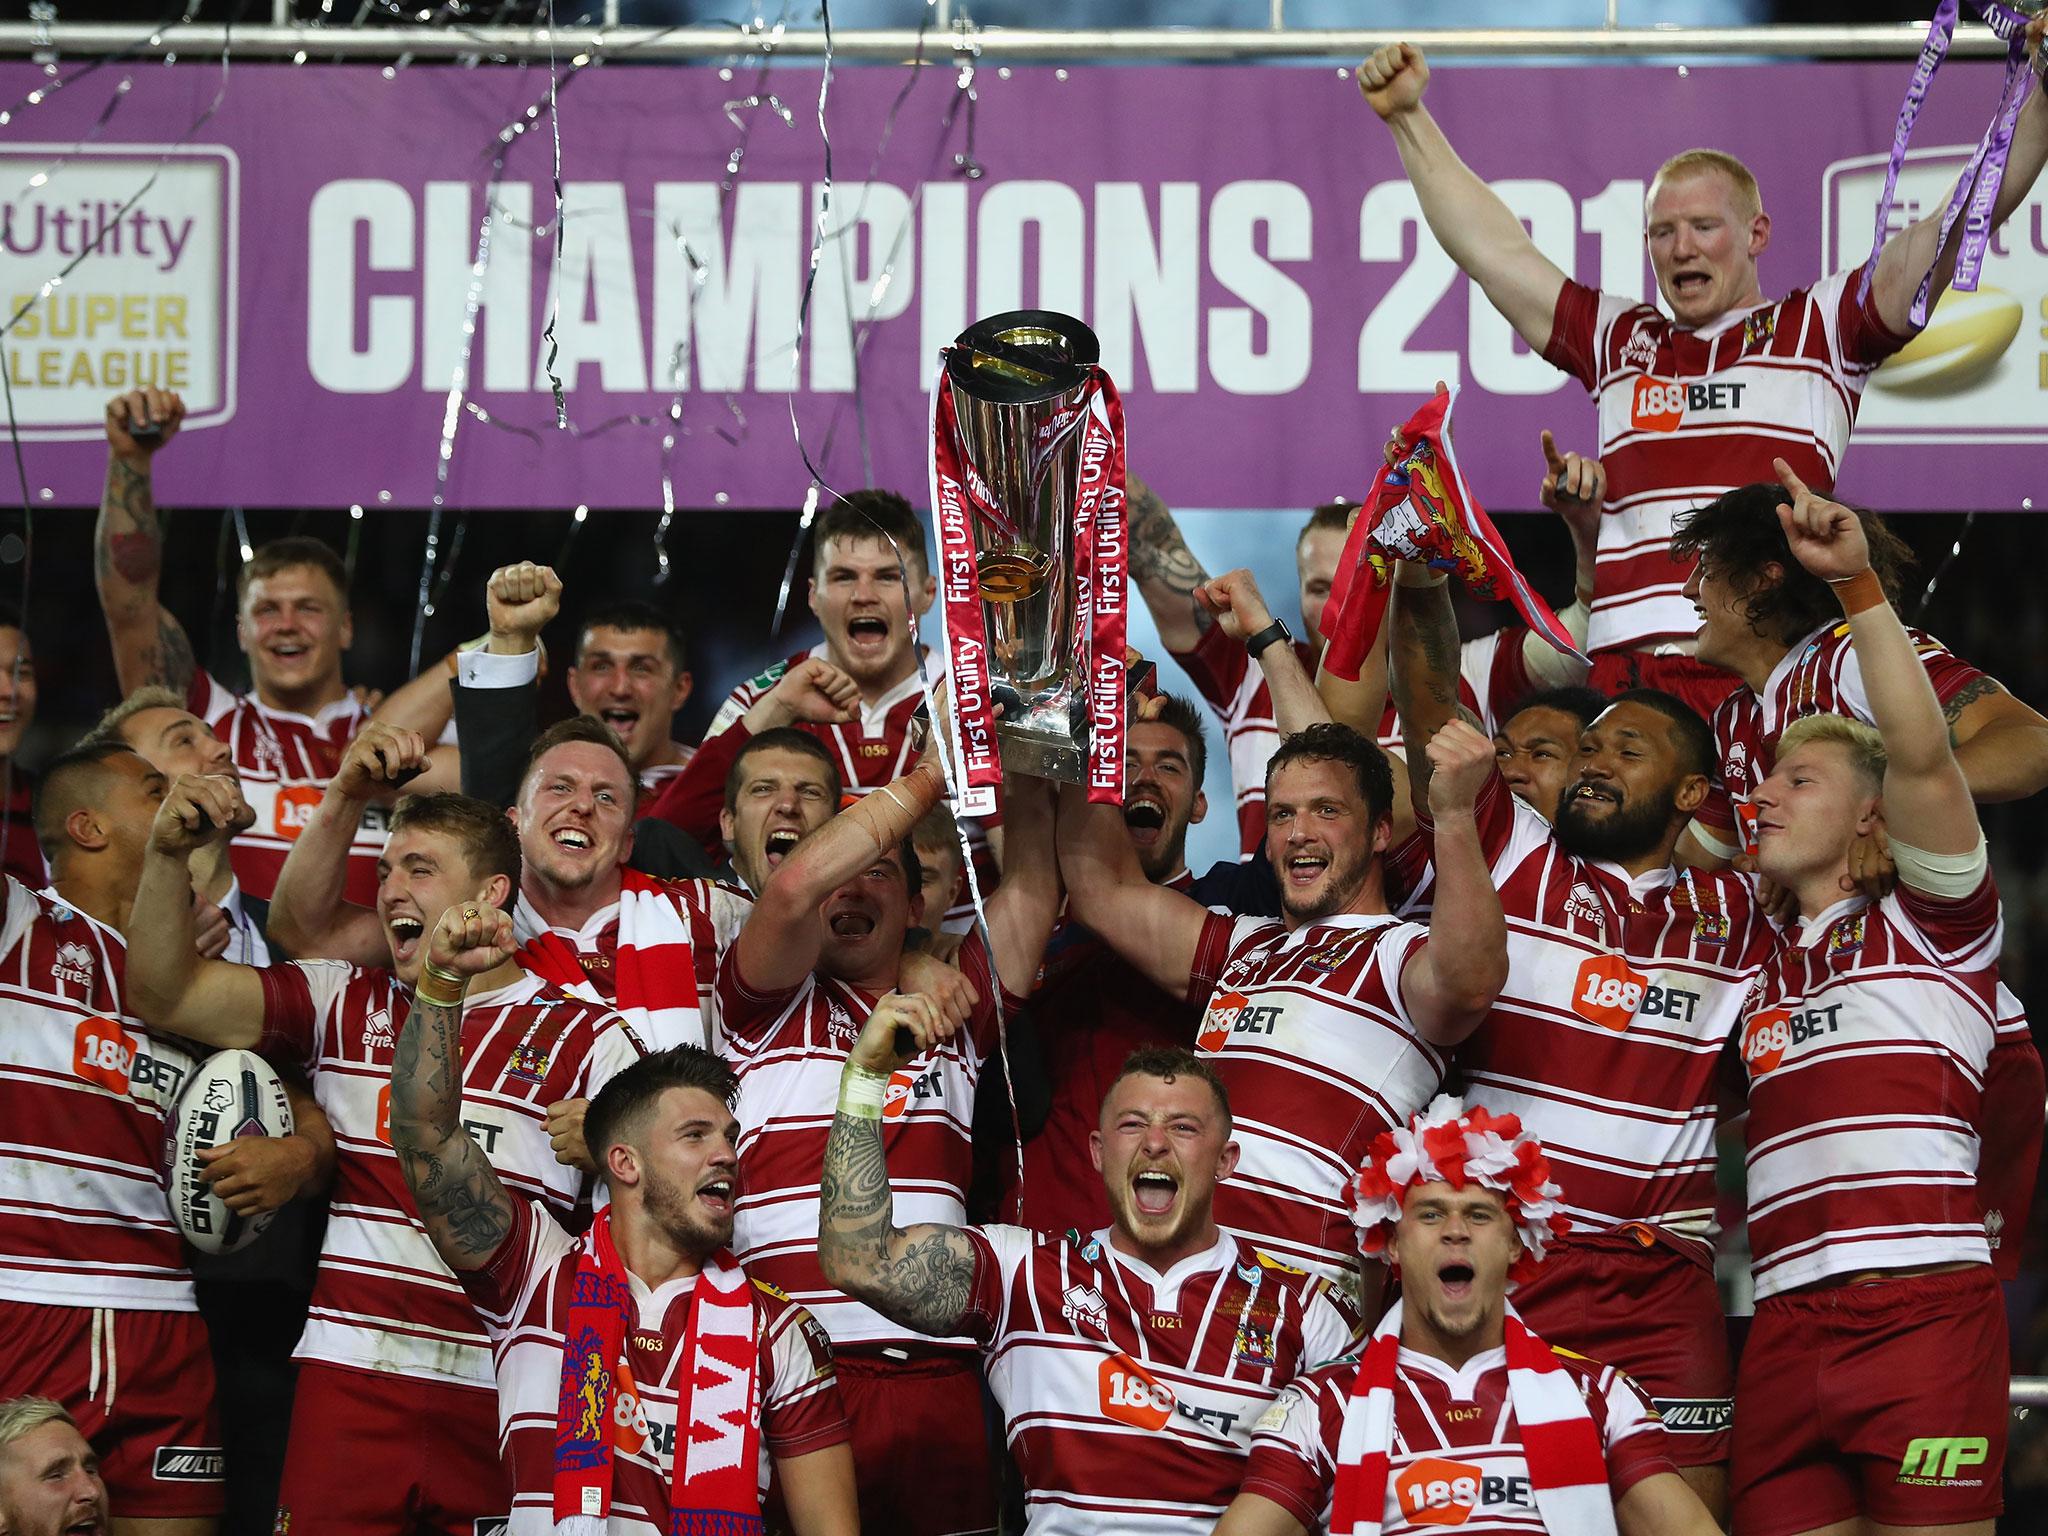 Super League clubs have voted to increase the salary cap